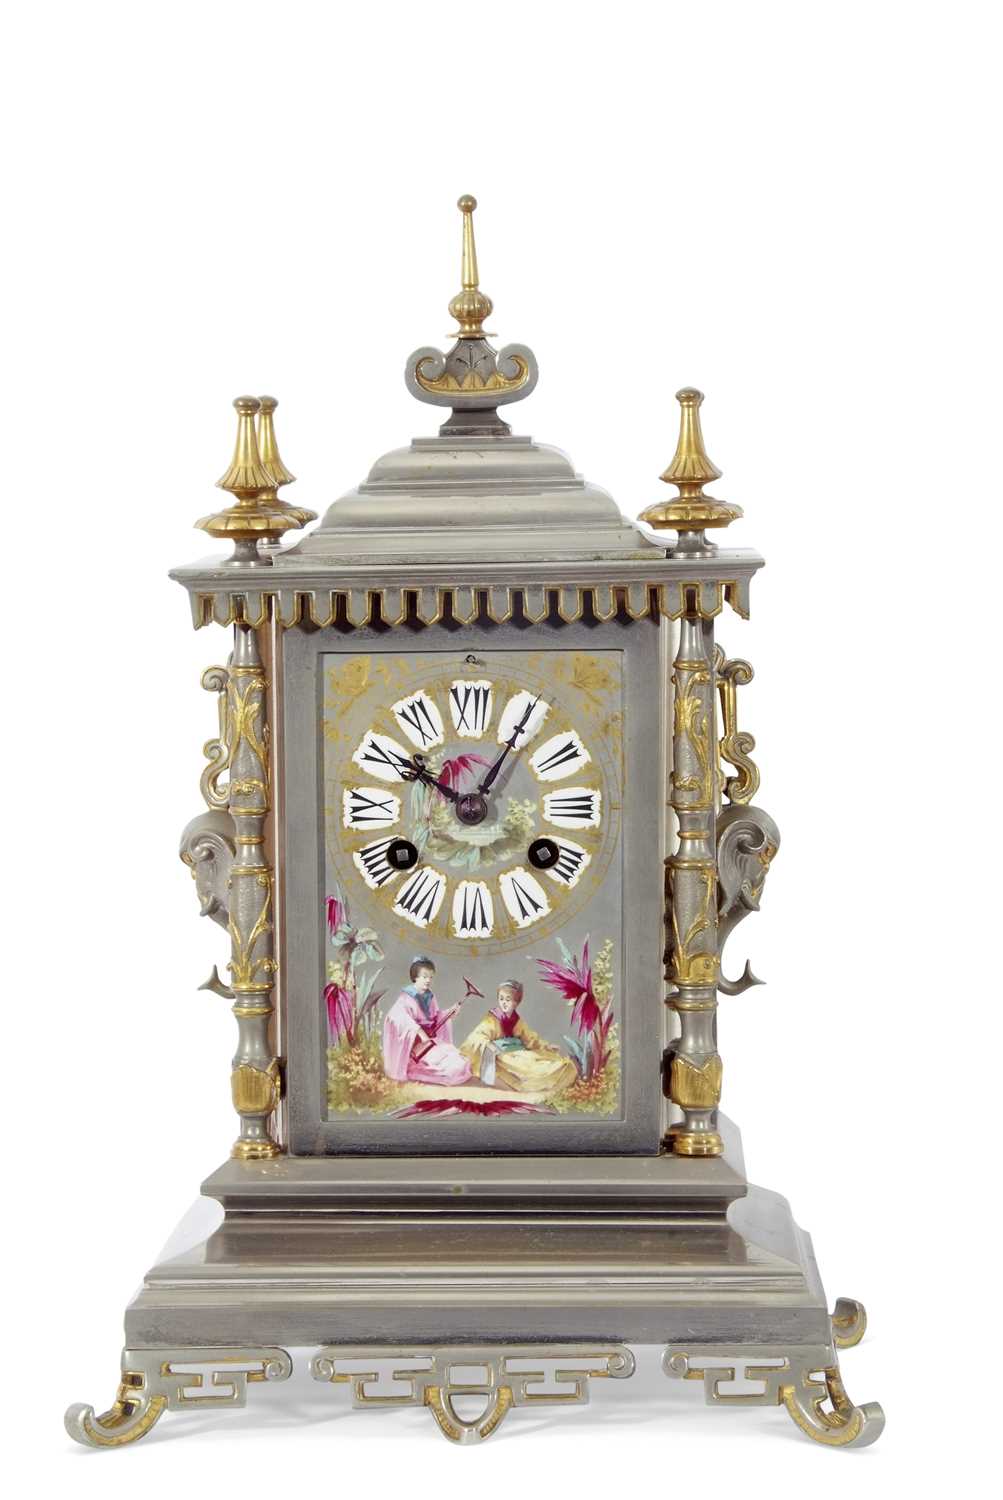 Good quality late 19th/early 20th century mantel clock, set in architectural metal and gilt - Image 2 of 11